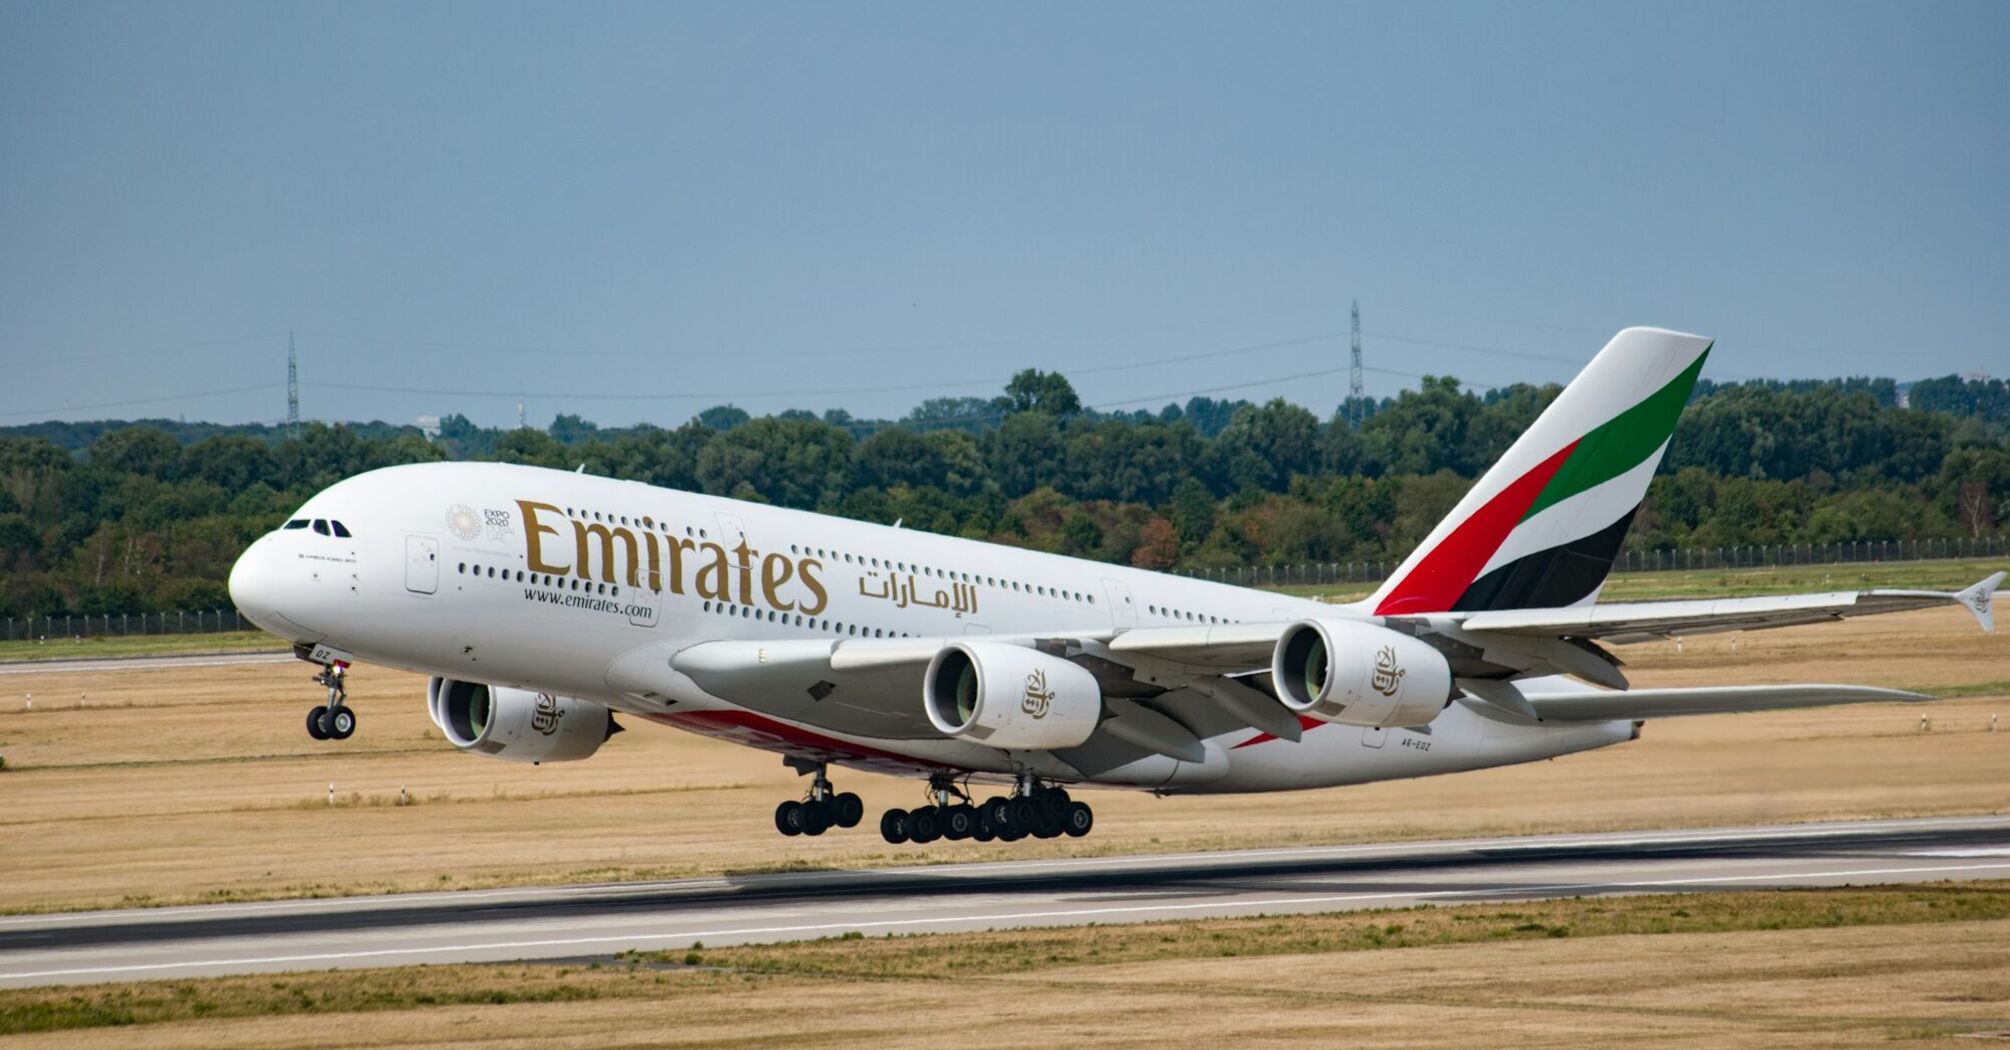 An Emirates Airbus A380 taking off from a runway